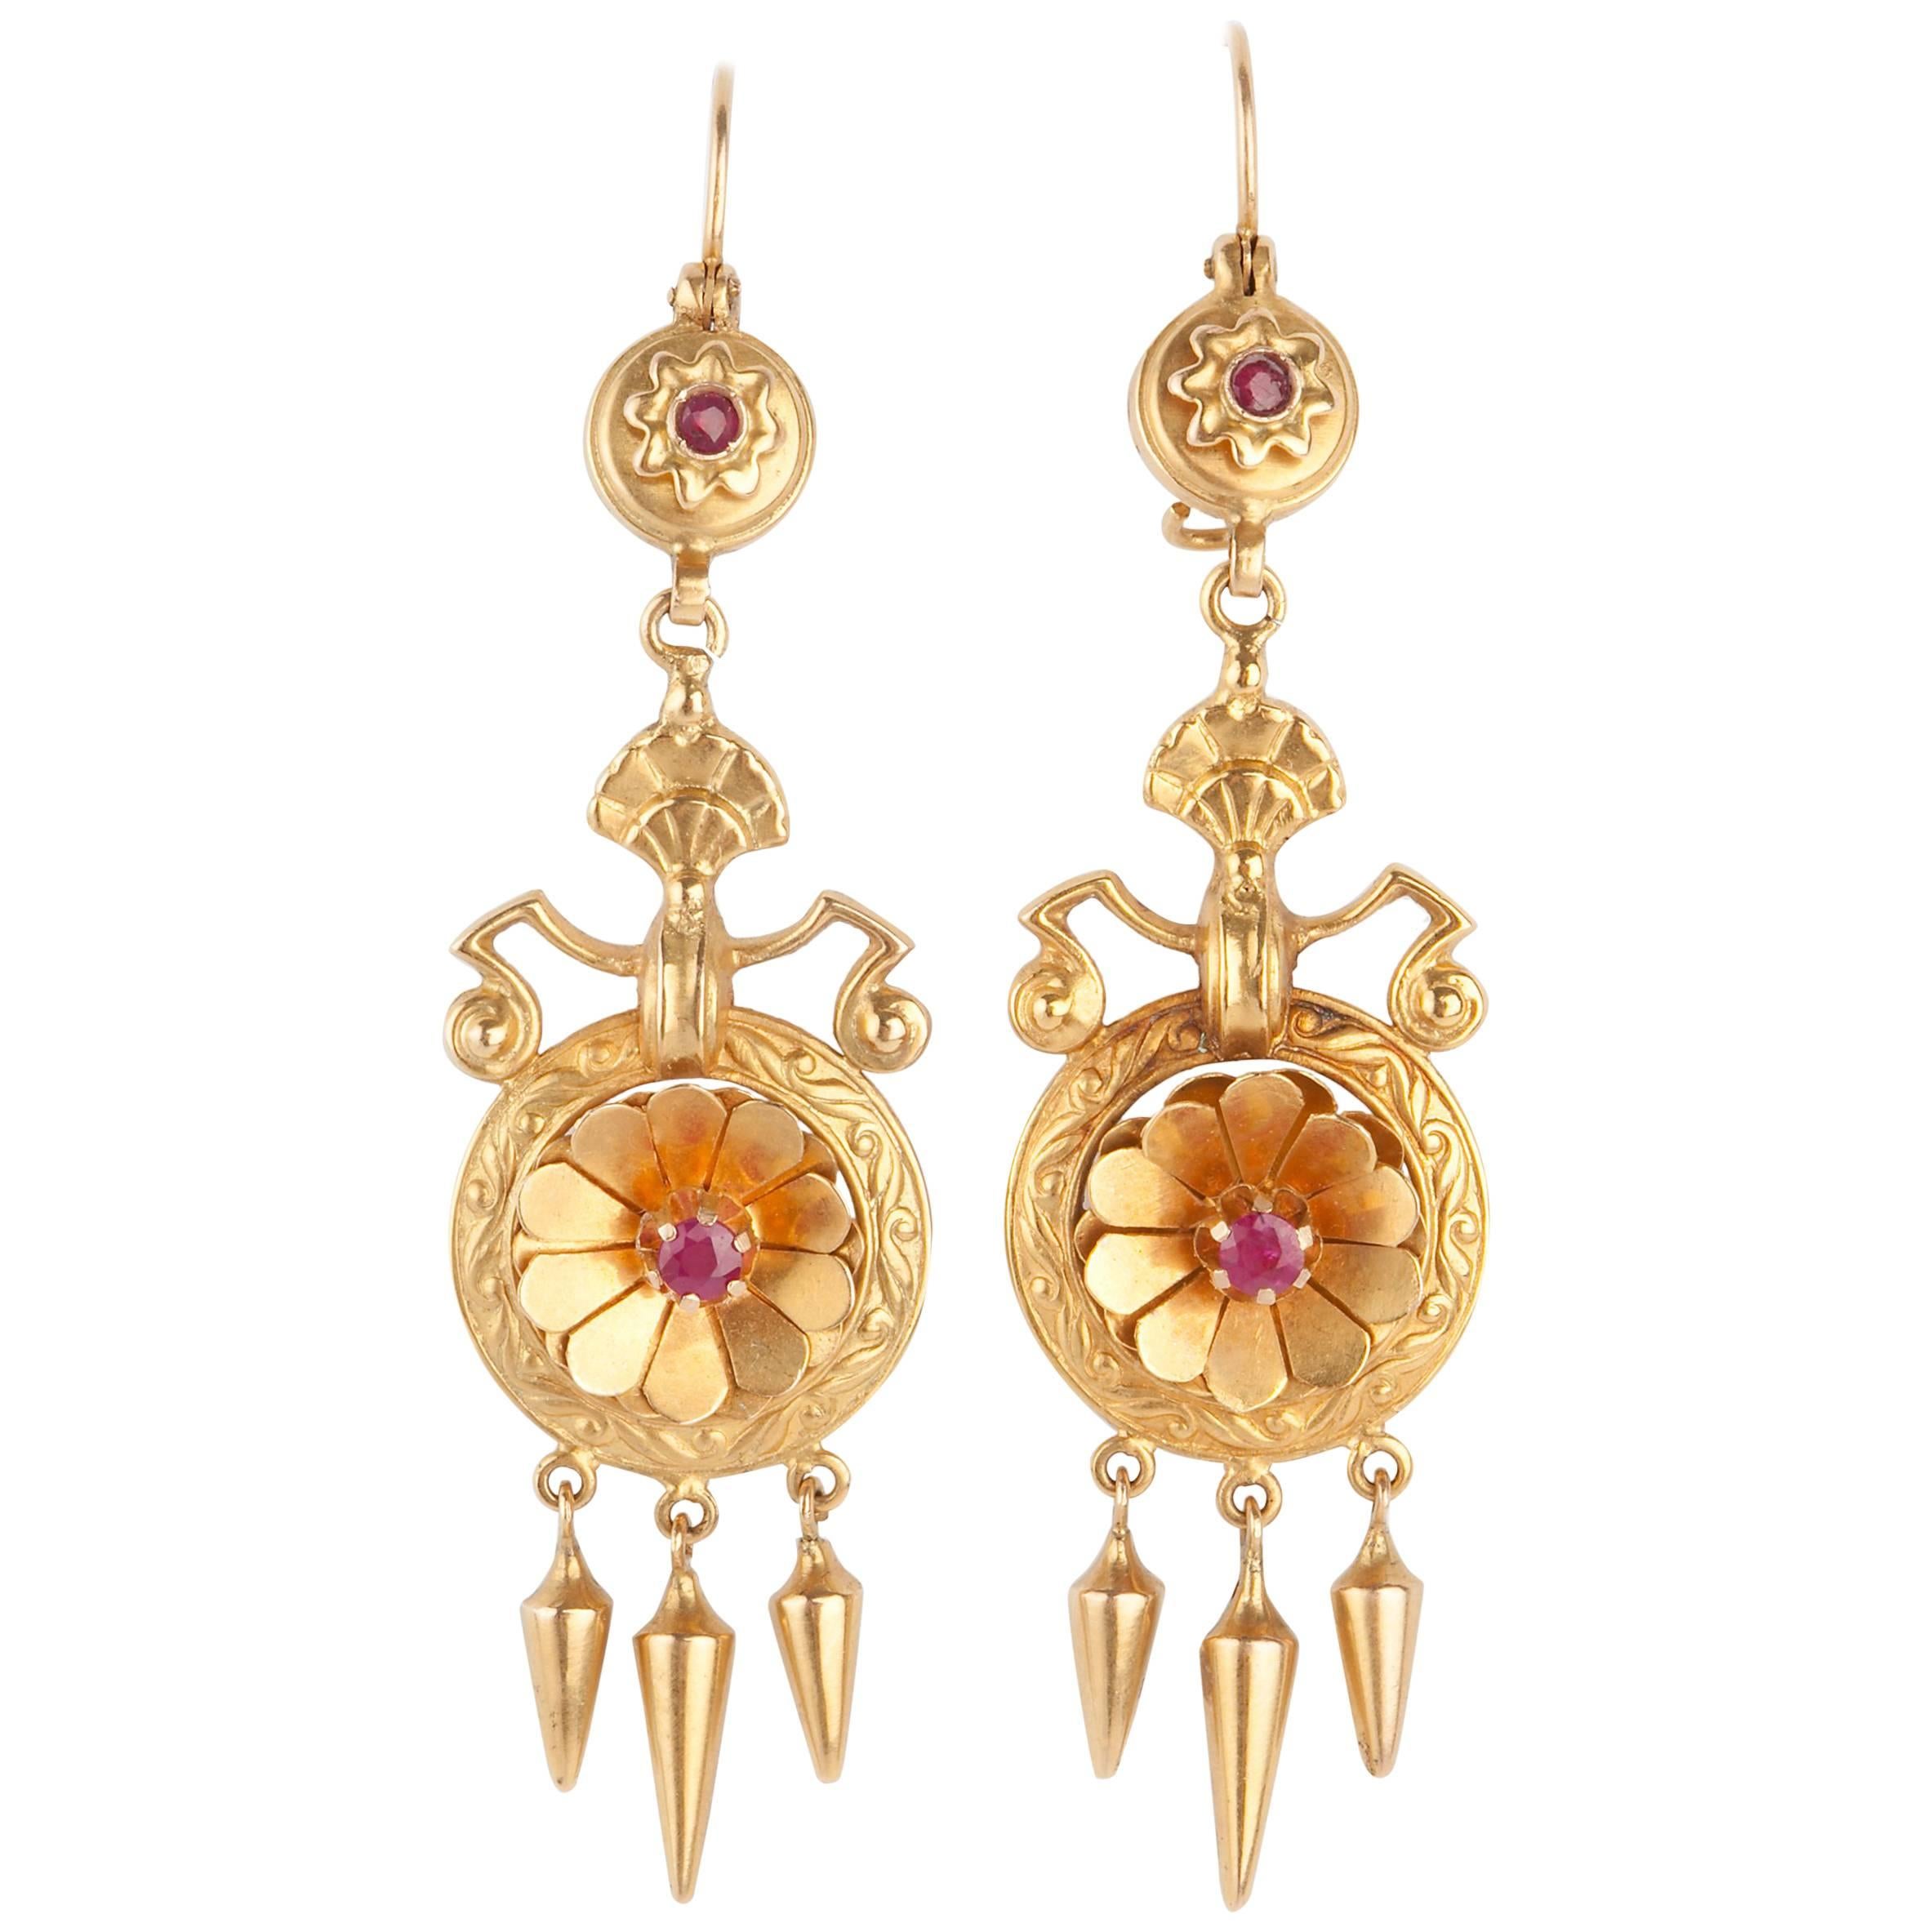 Pair of 15 Karat Gold Etruscan Revival Victorian Earrings For Sale